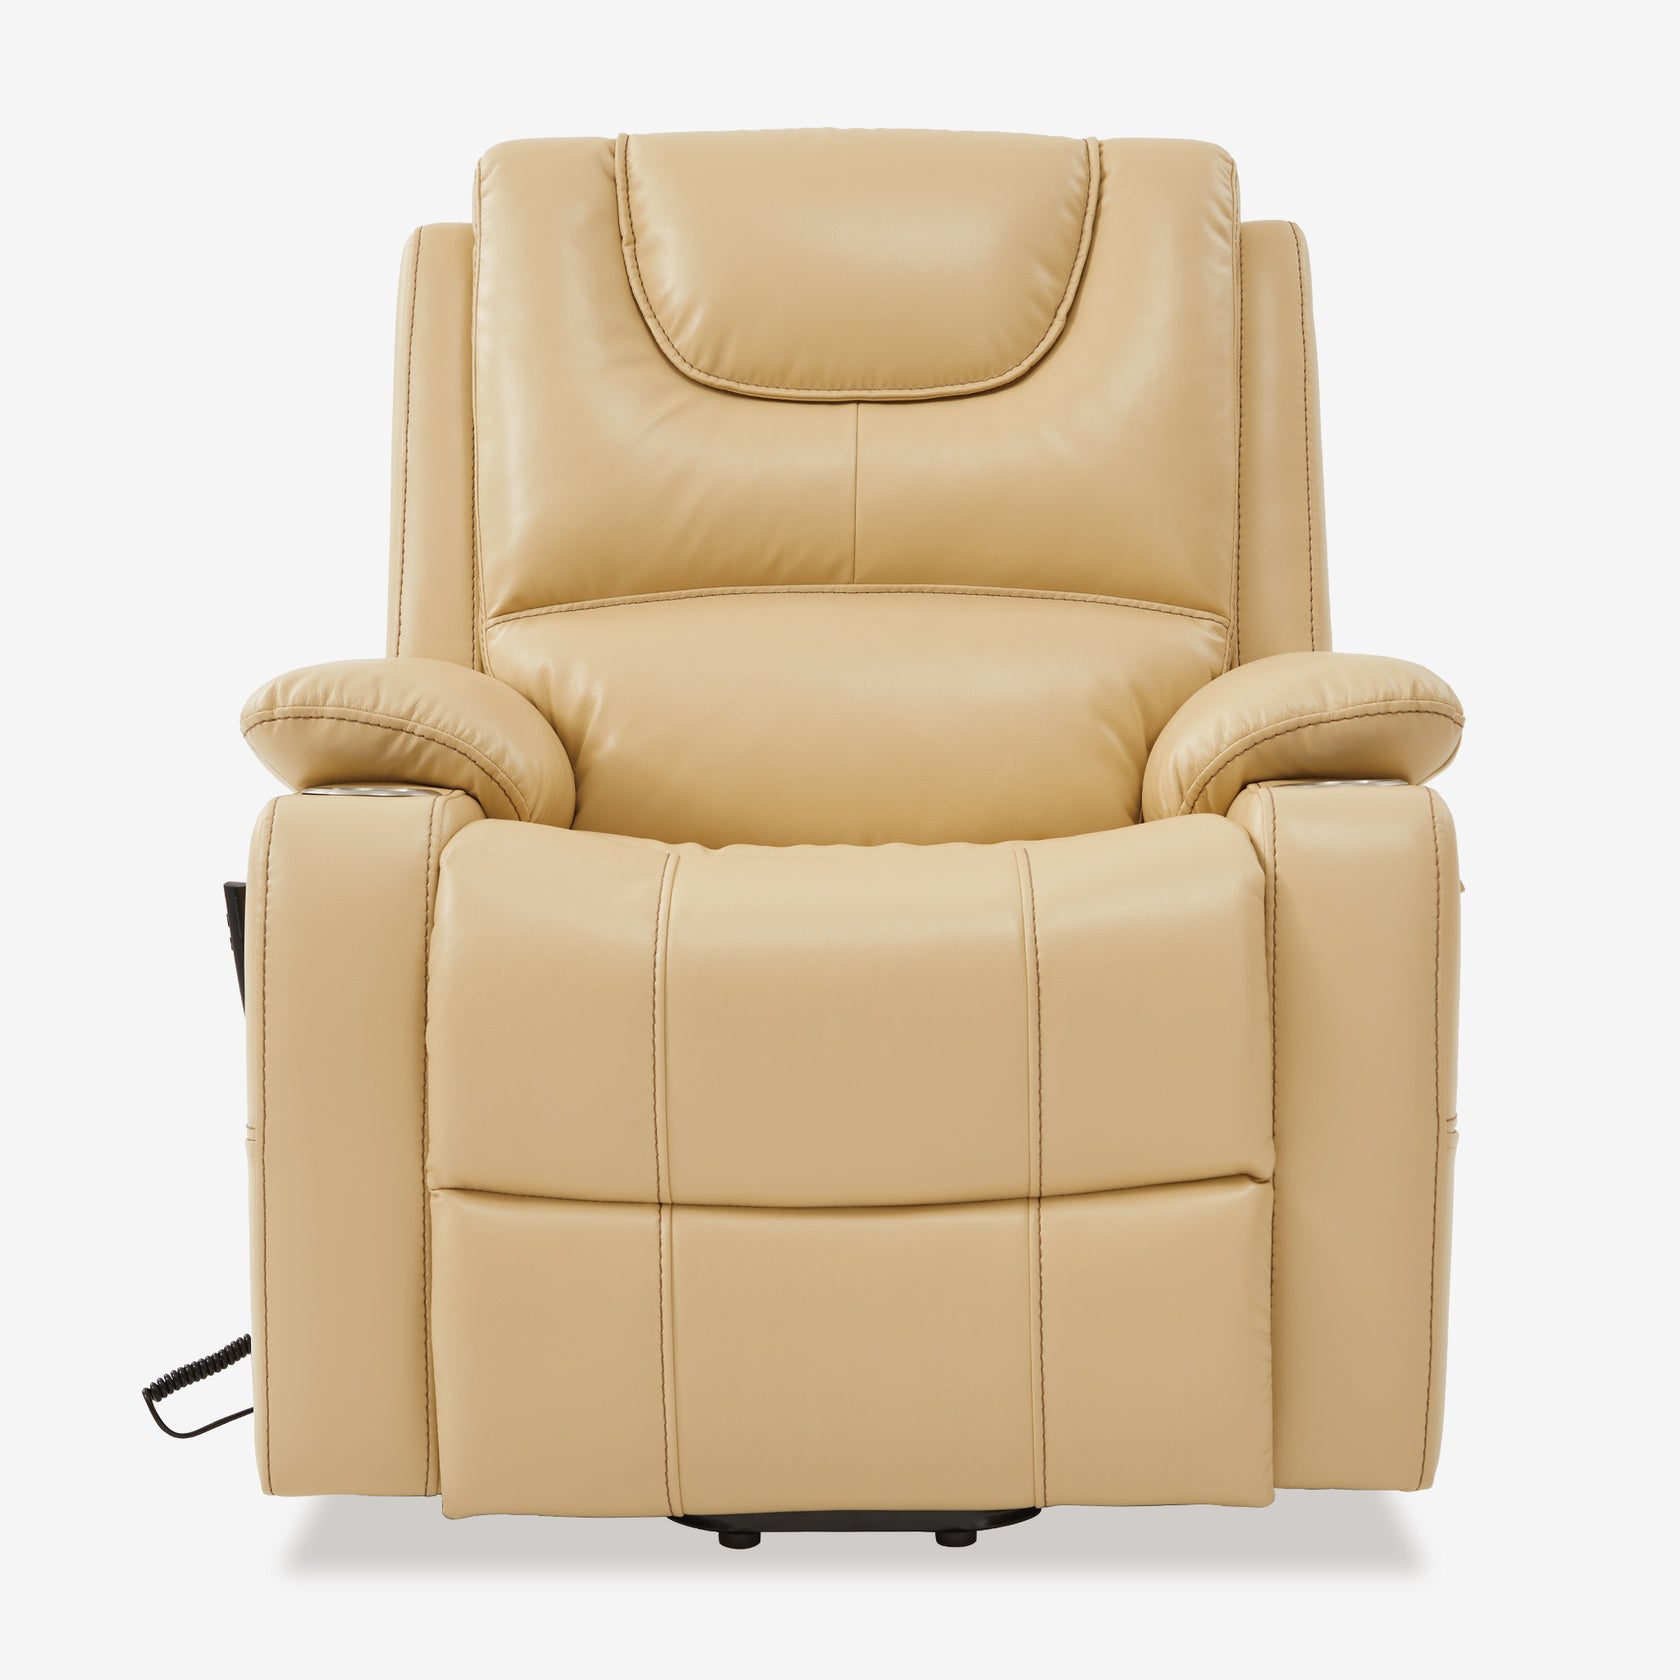 Lay Flat Sleeper Recliner With Heating Massage And Cup Holder – IRENE HOUSE